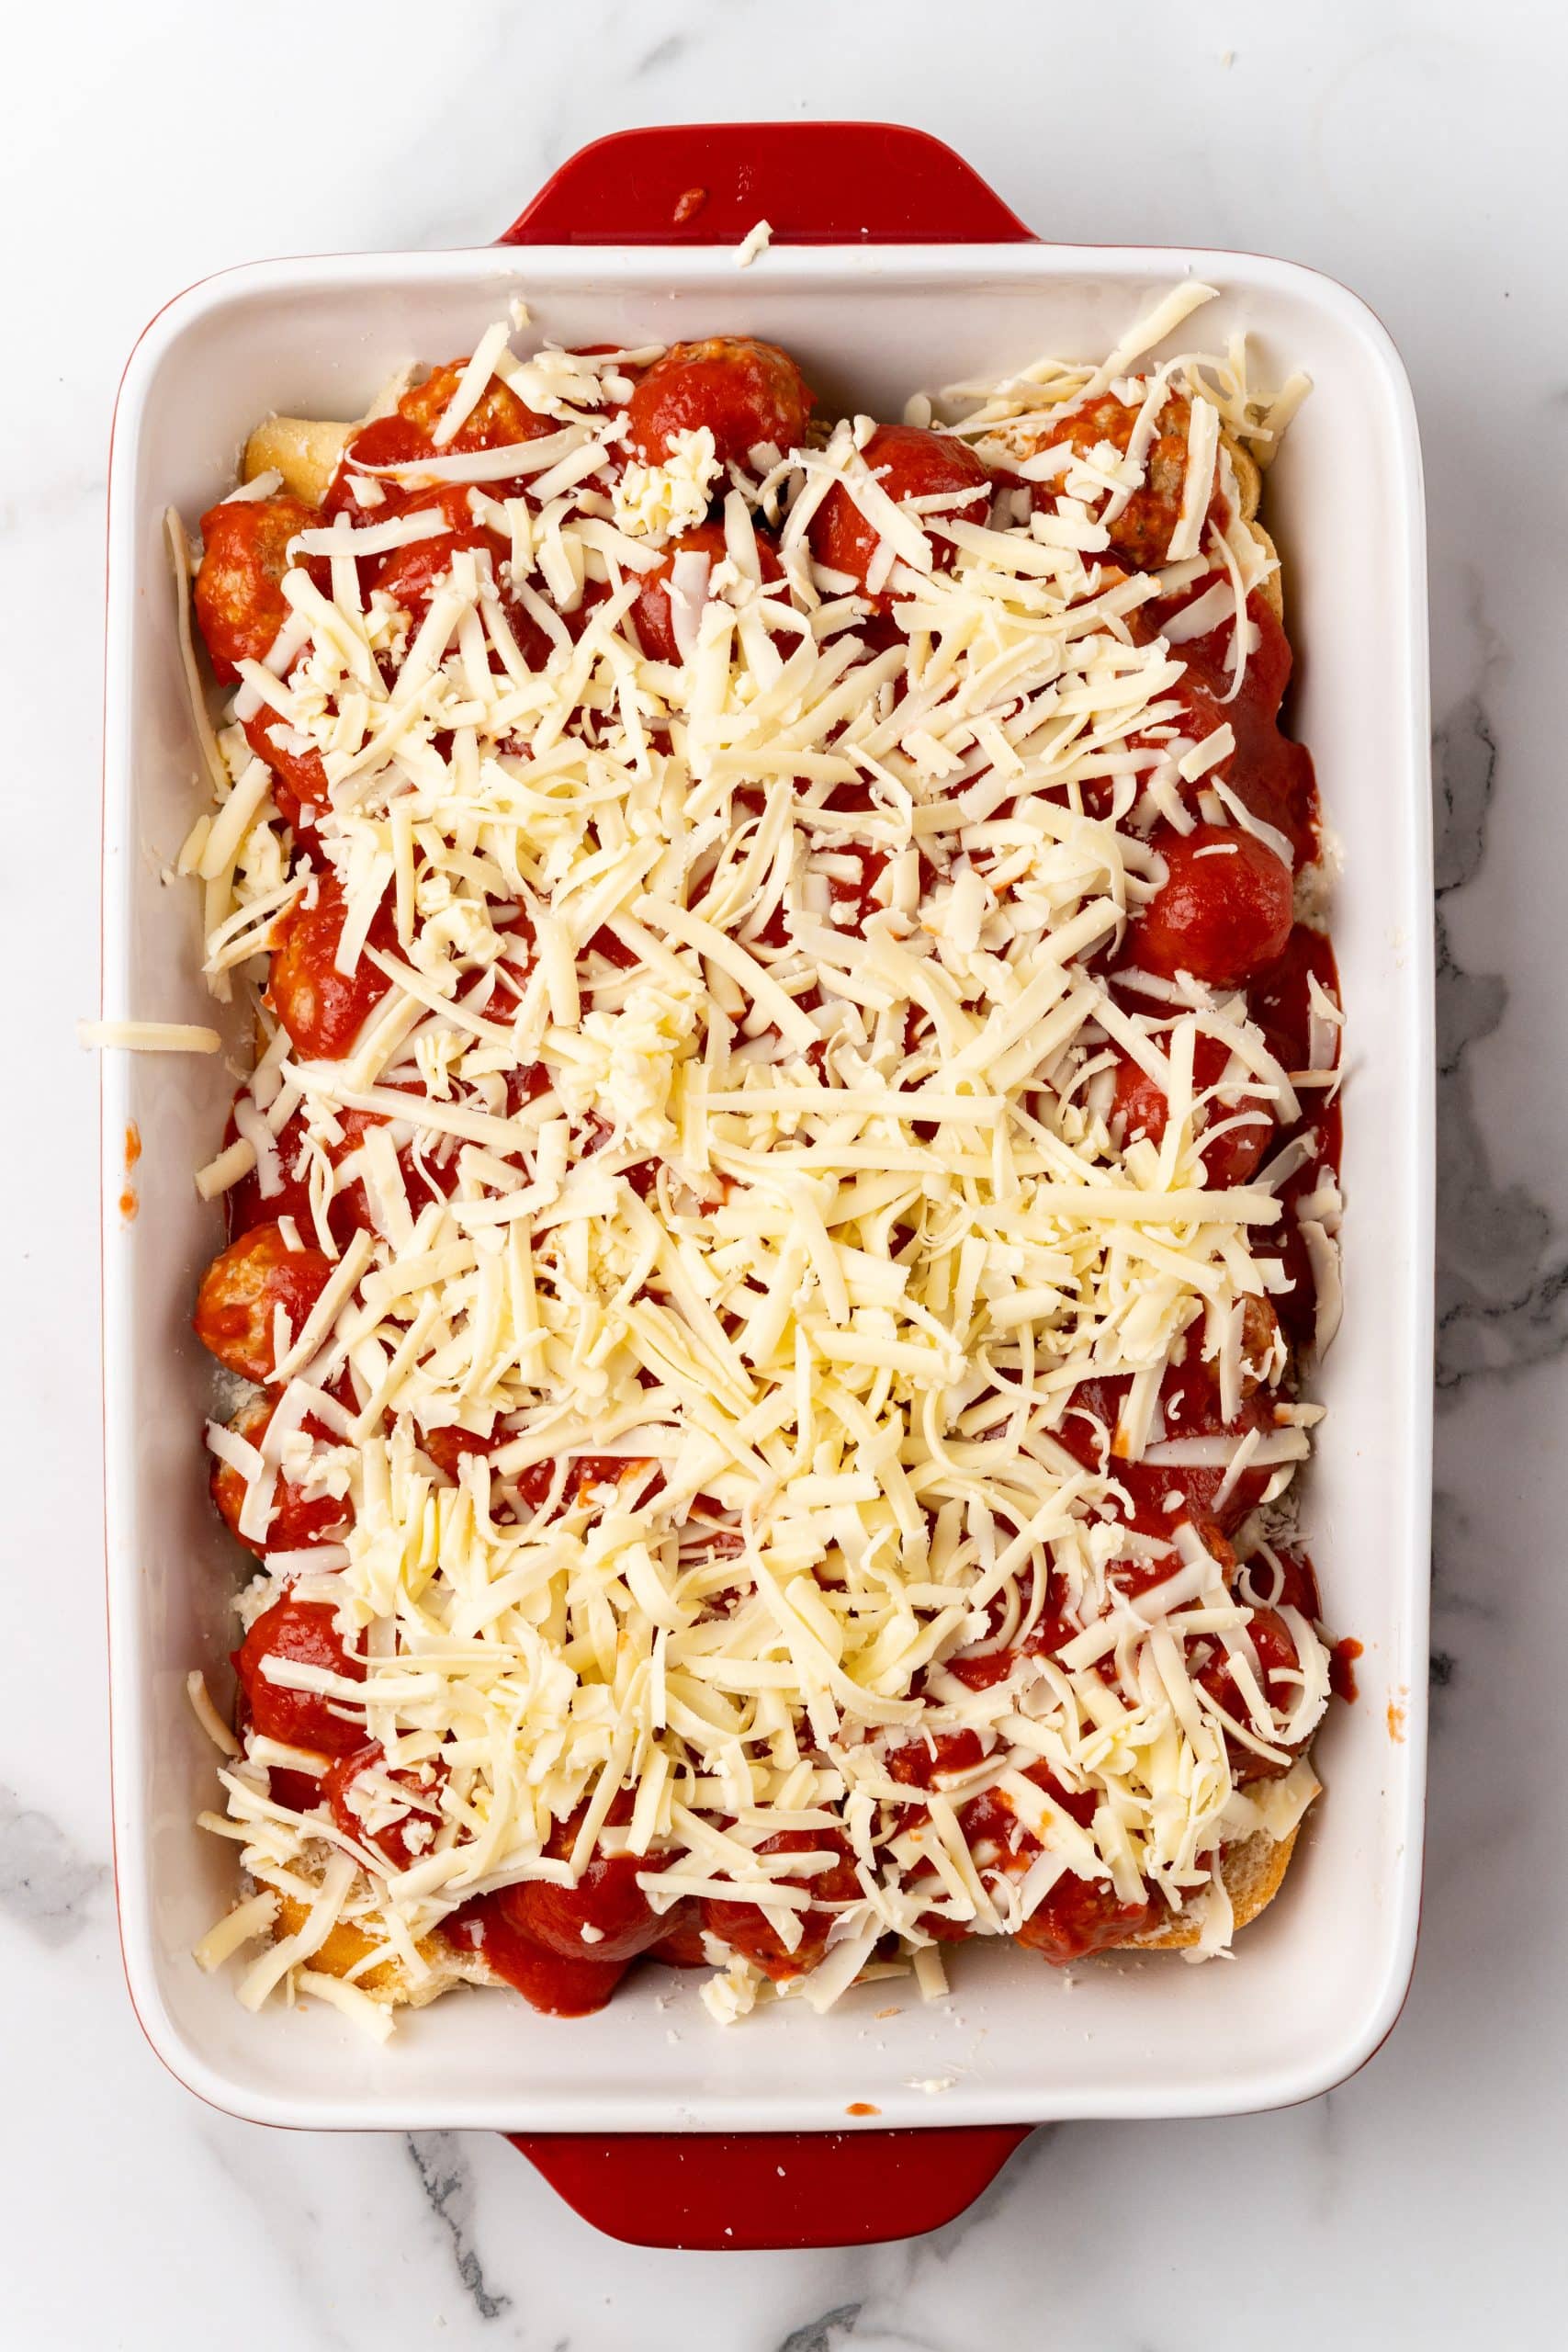 shredded cheese topped meatballs and sauce spread over slices of bread in a large baking dish